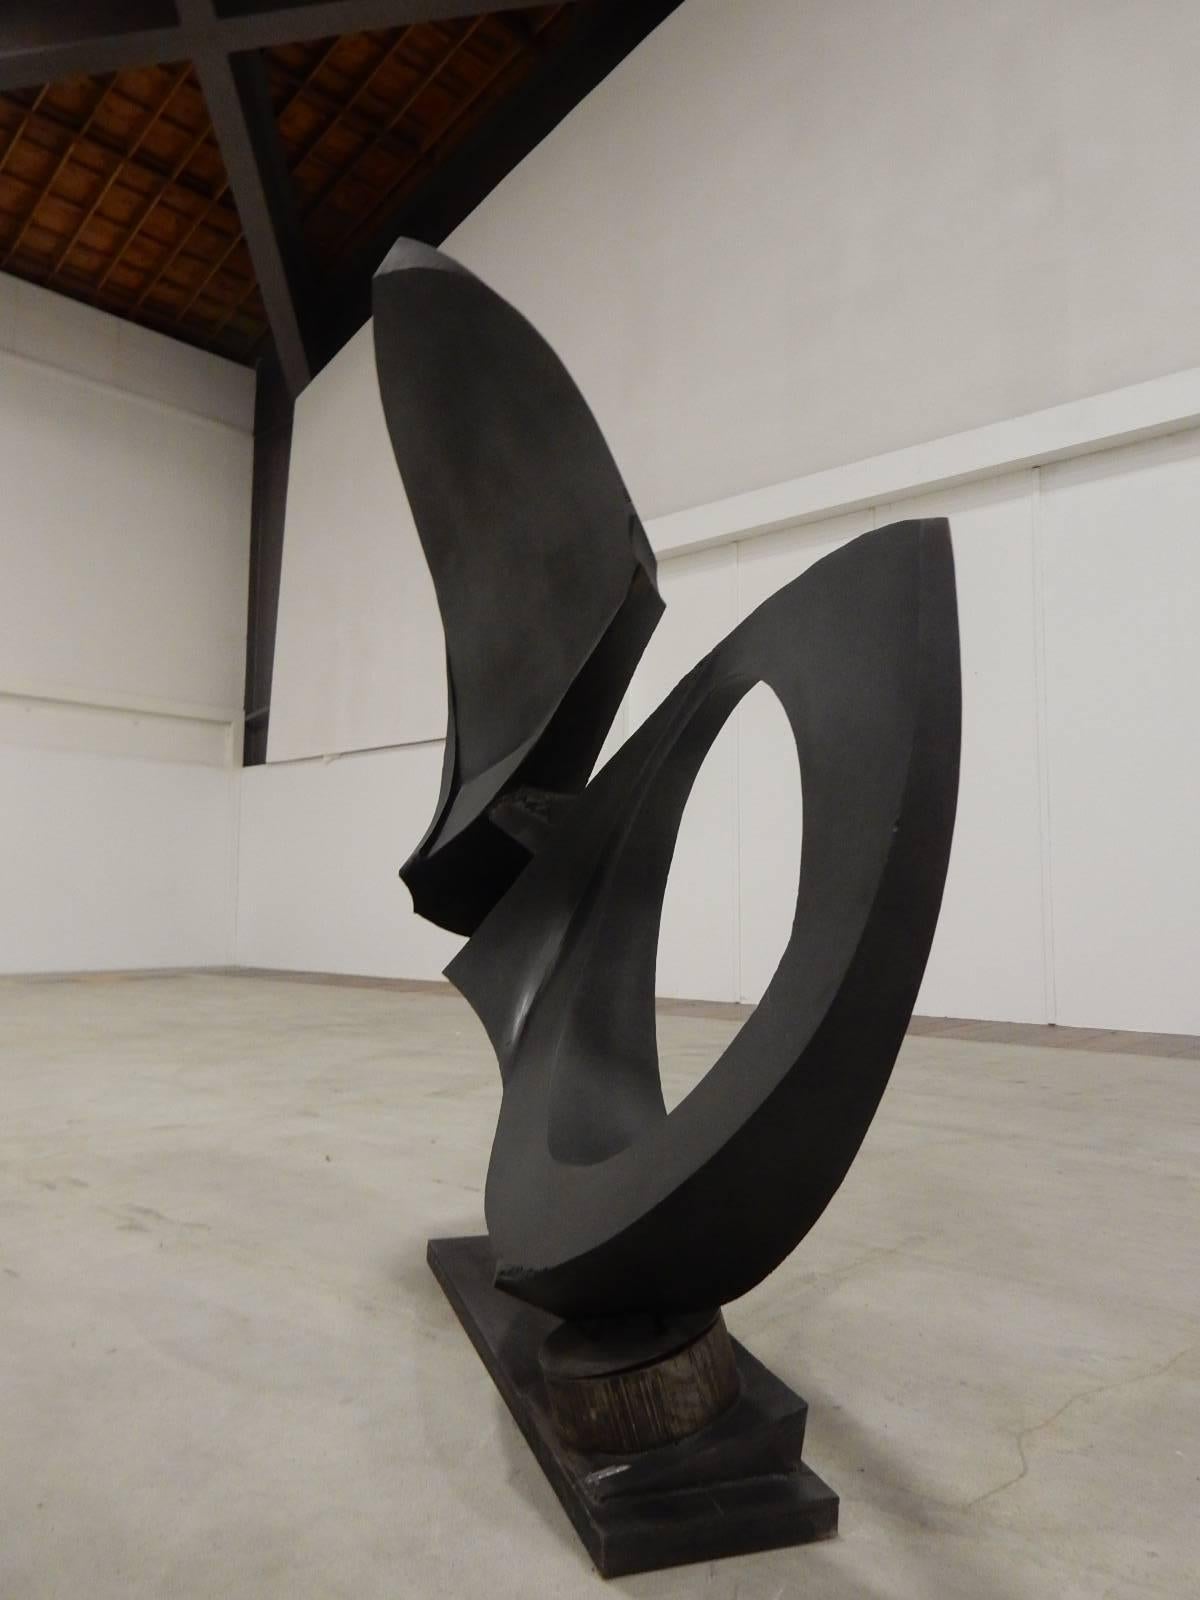 French Huge Sail Welded Steel Sculpture by Cyrille Husson For Sale